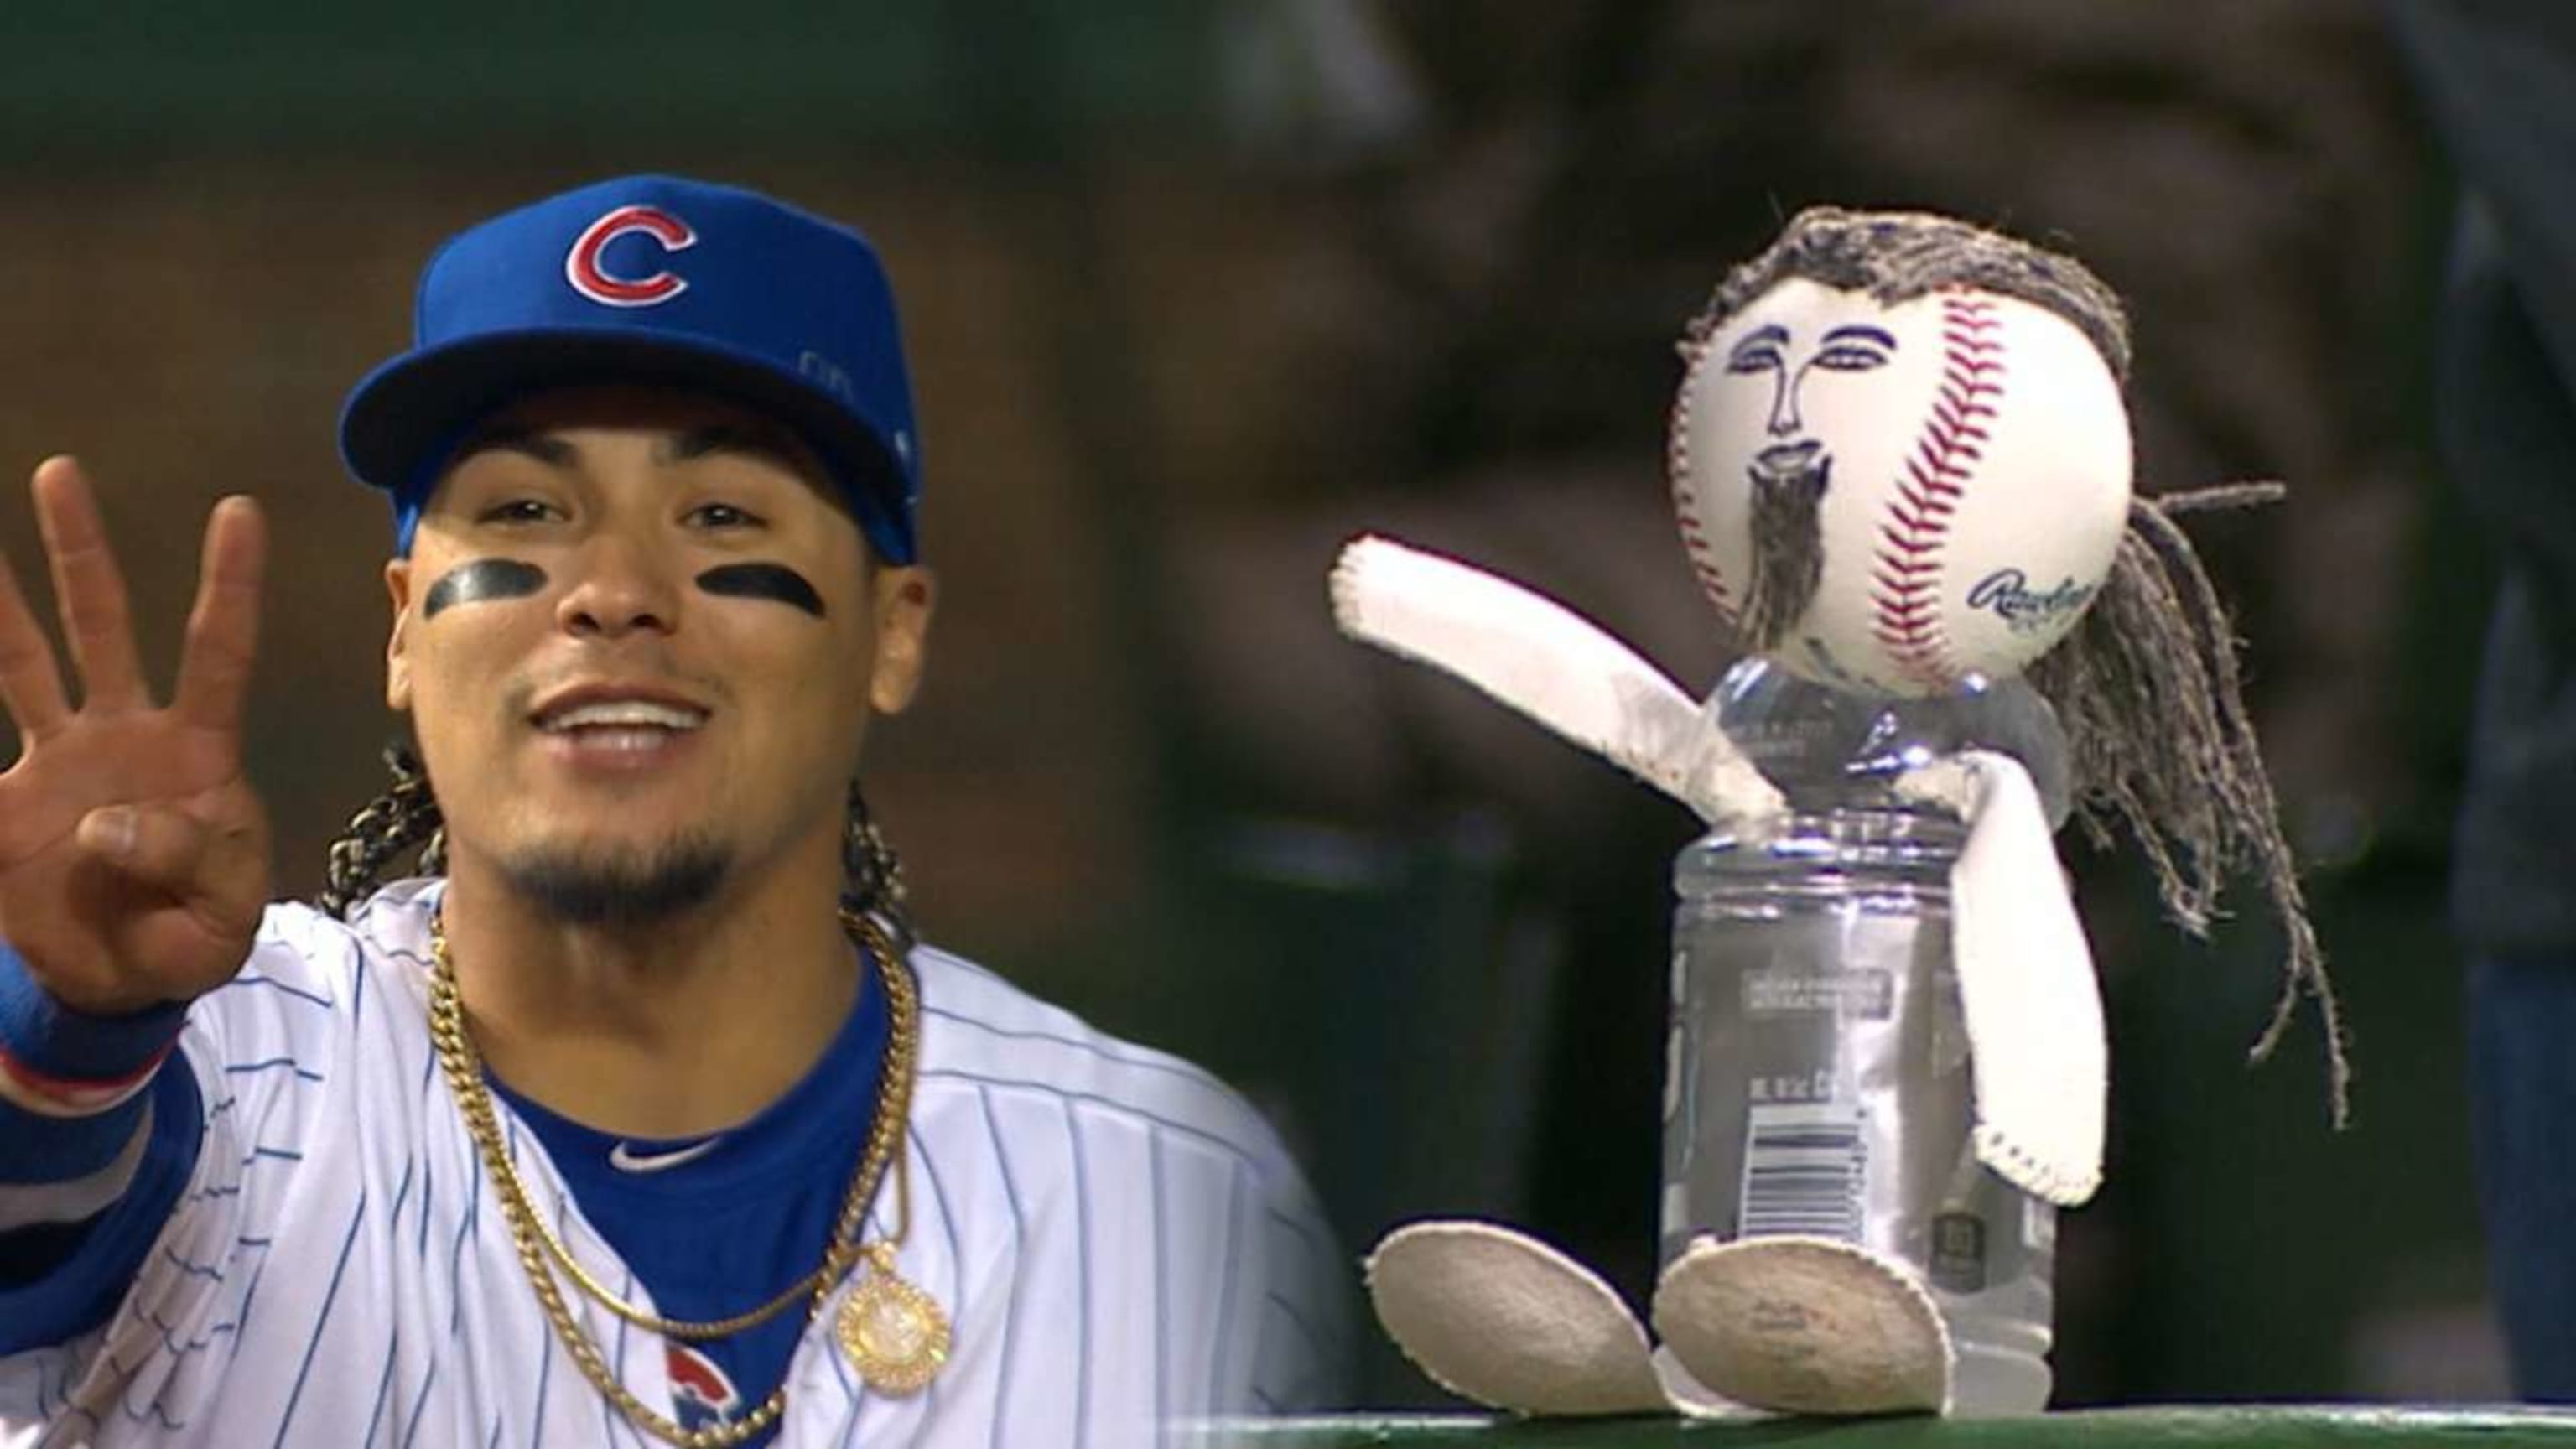 The Brewers cobbled together a Javy Baez baseball doll, and Baez got a kick  out of it